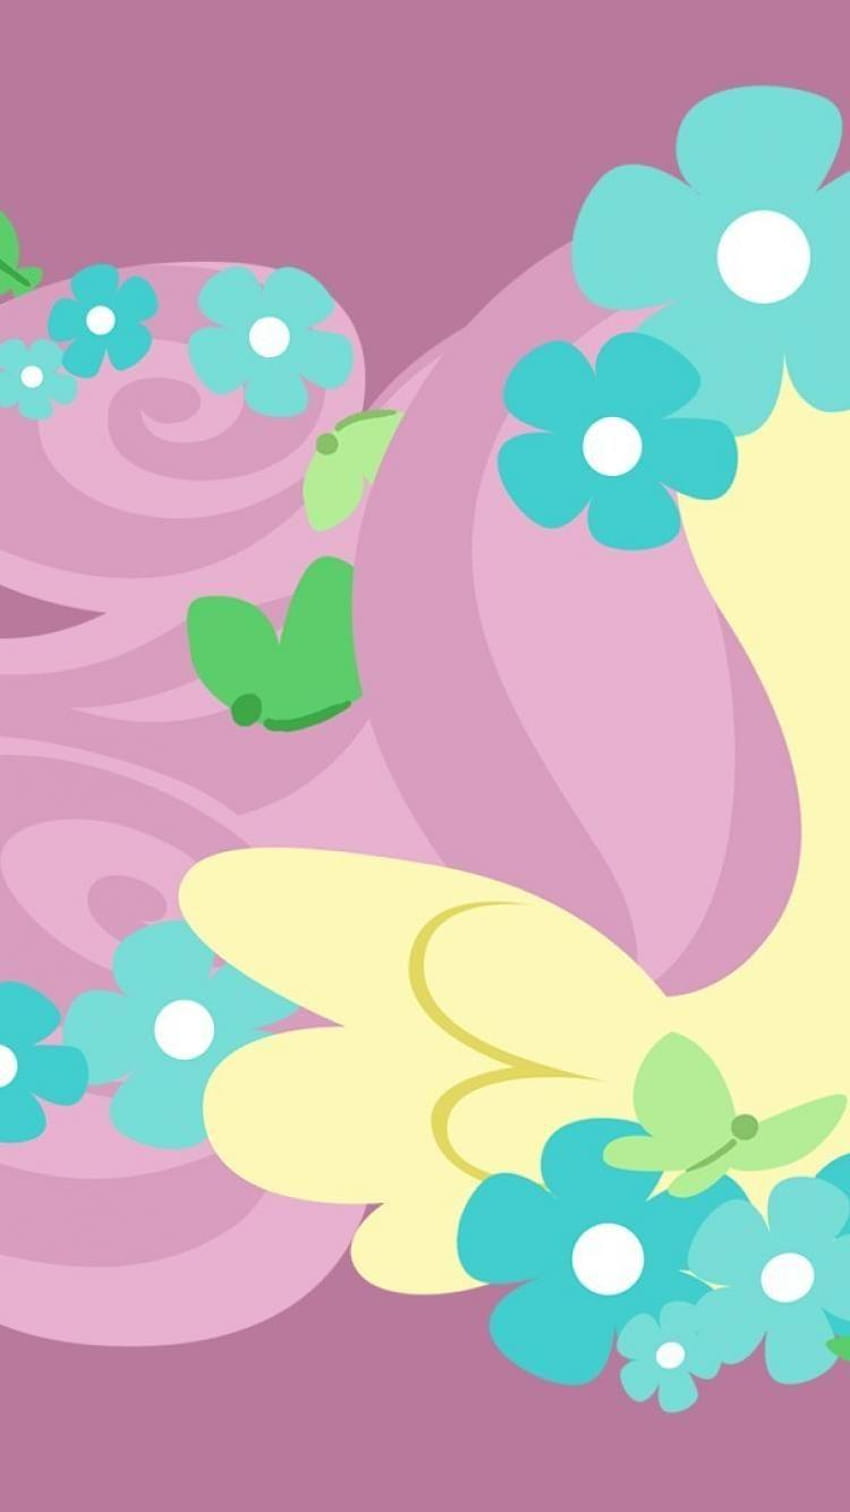 Fluttershy ponies my little pony: friendship is magic, little pony iphone HD phone wallpaper